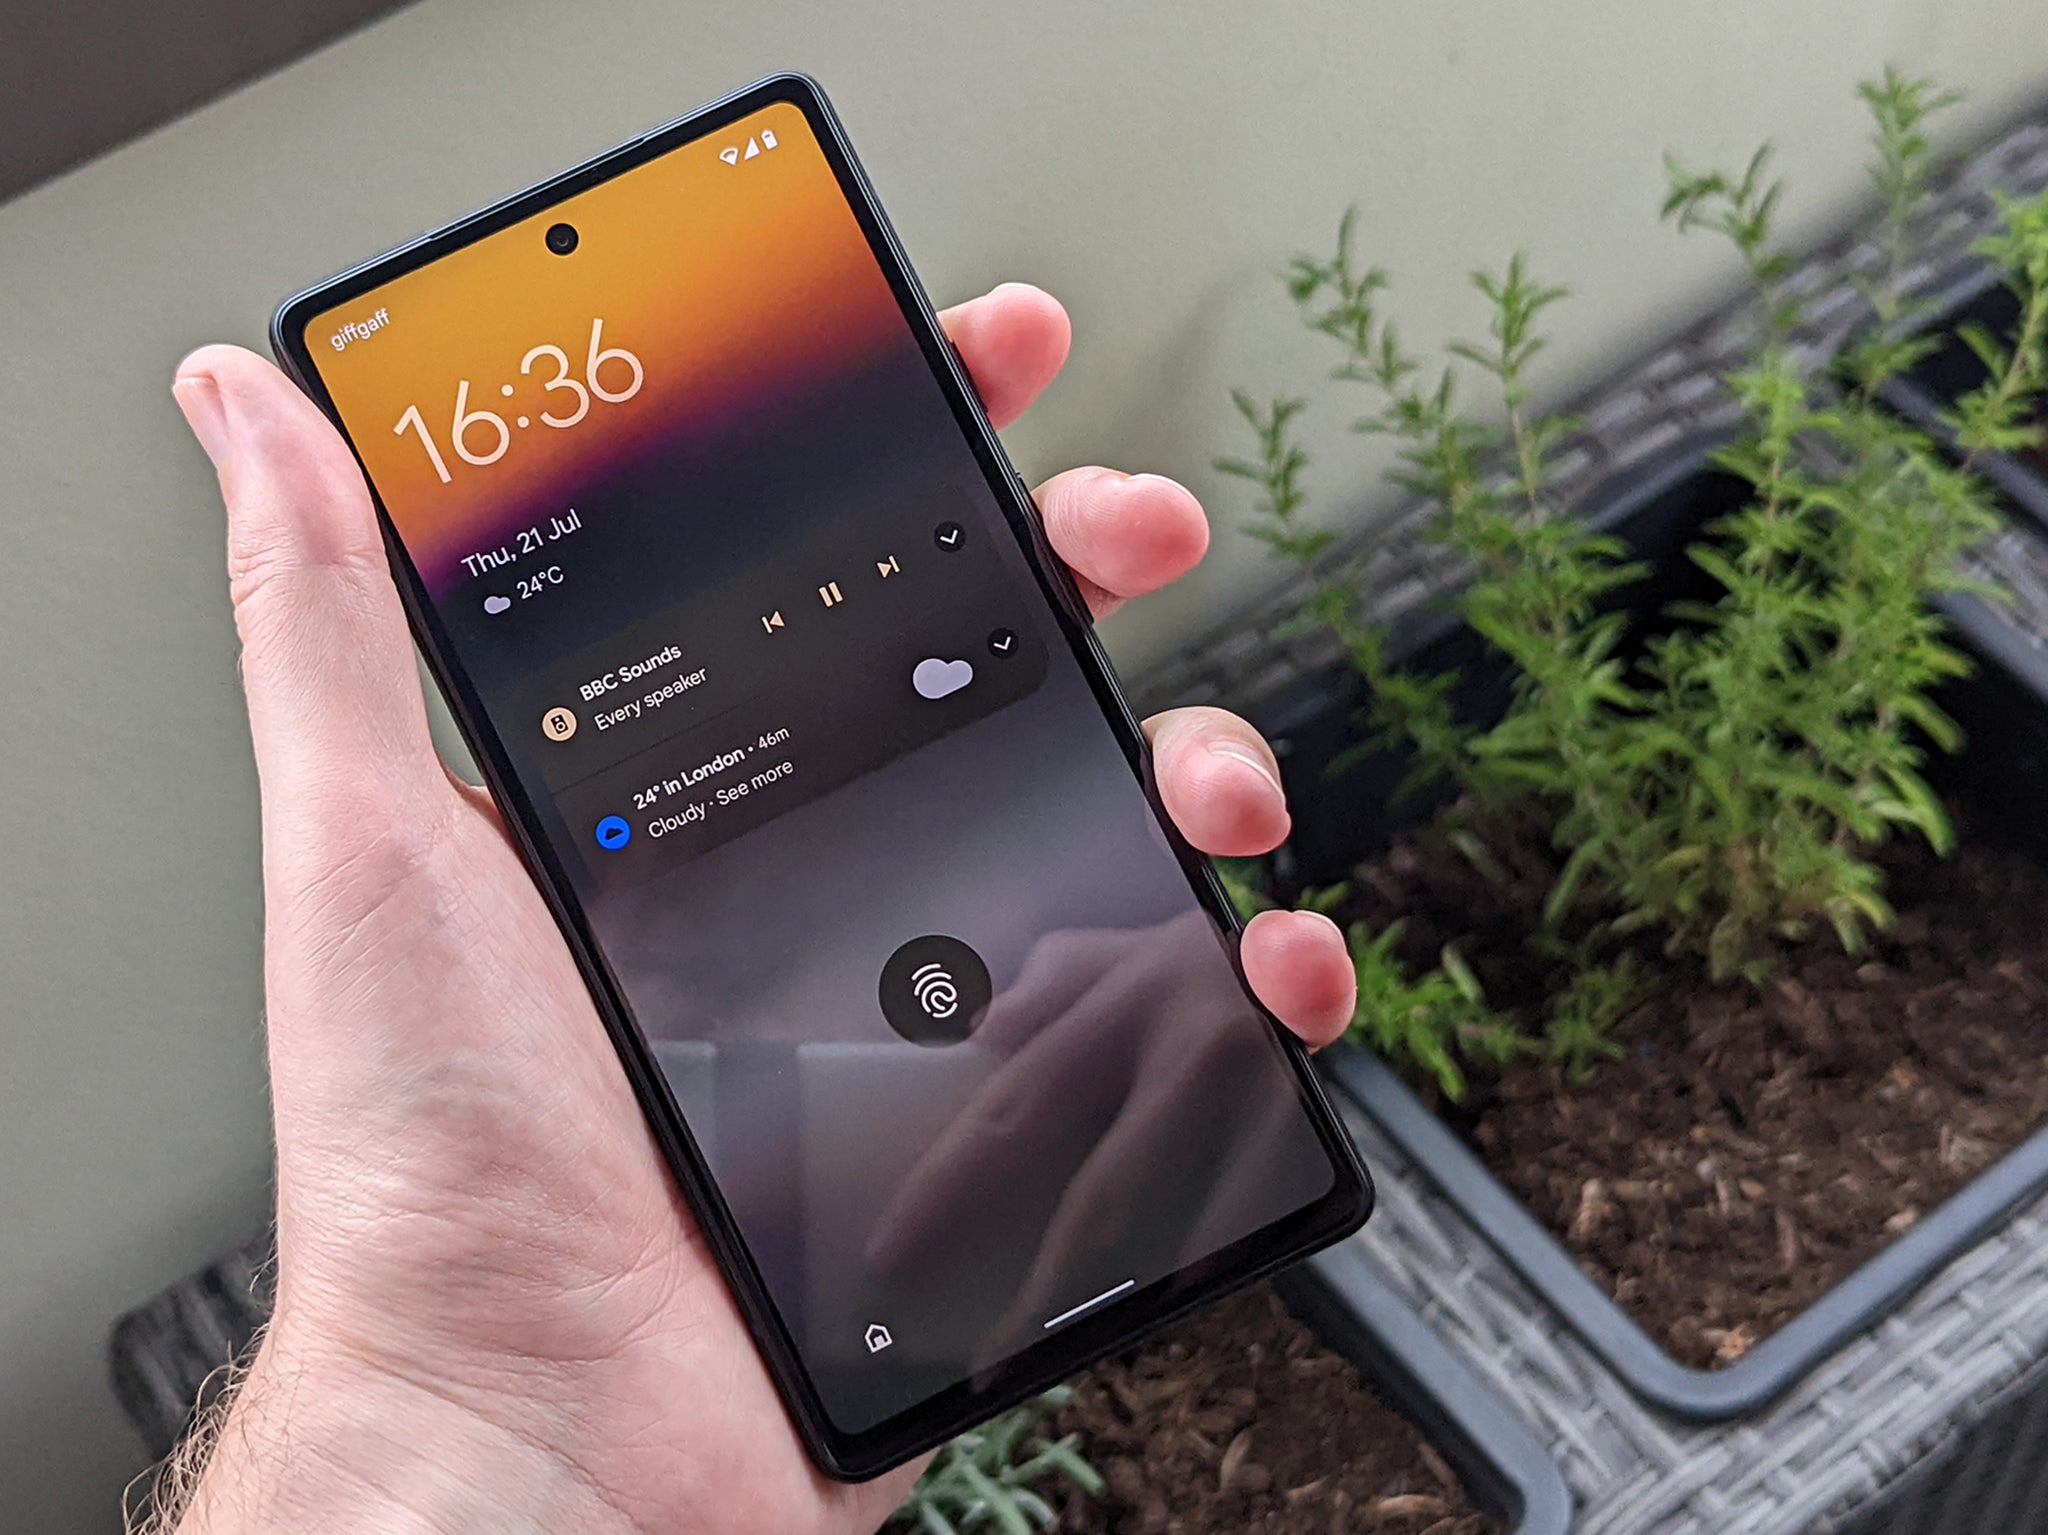 Google ducked face ID in favour of an under-display fingerprint scanner